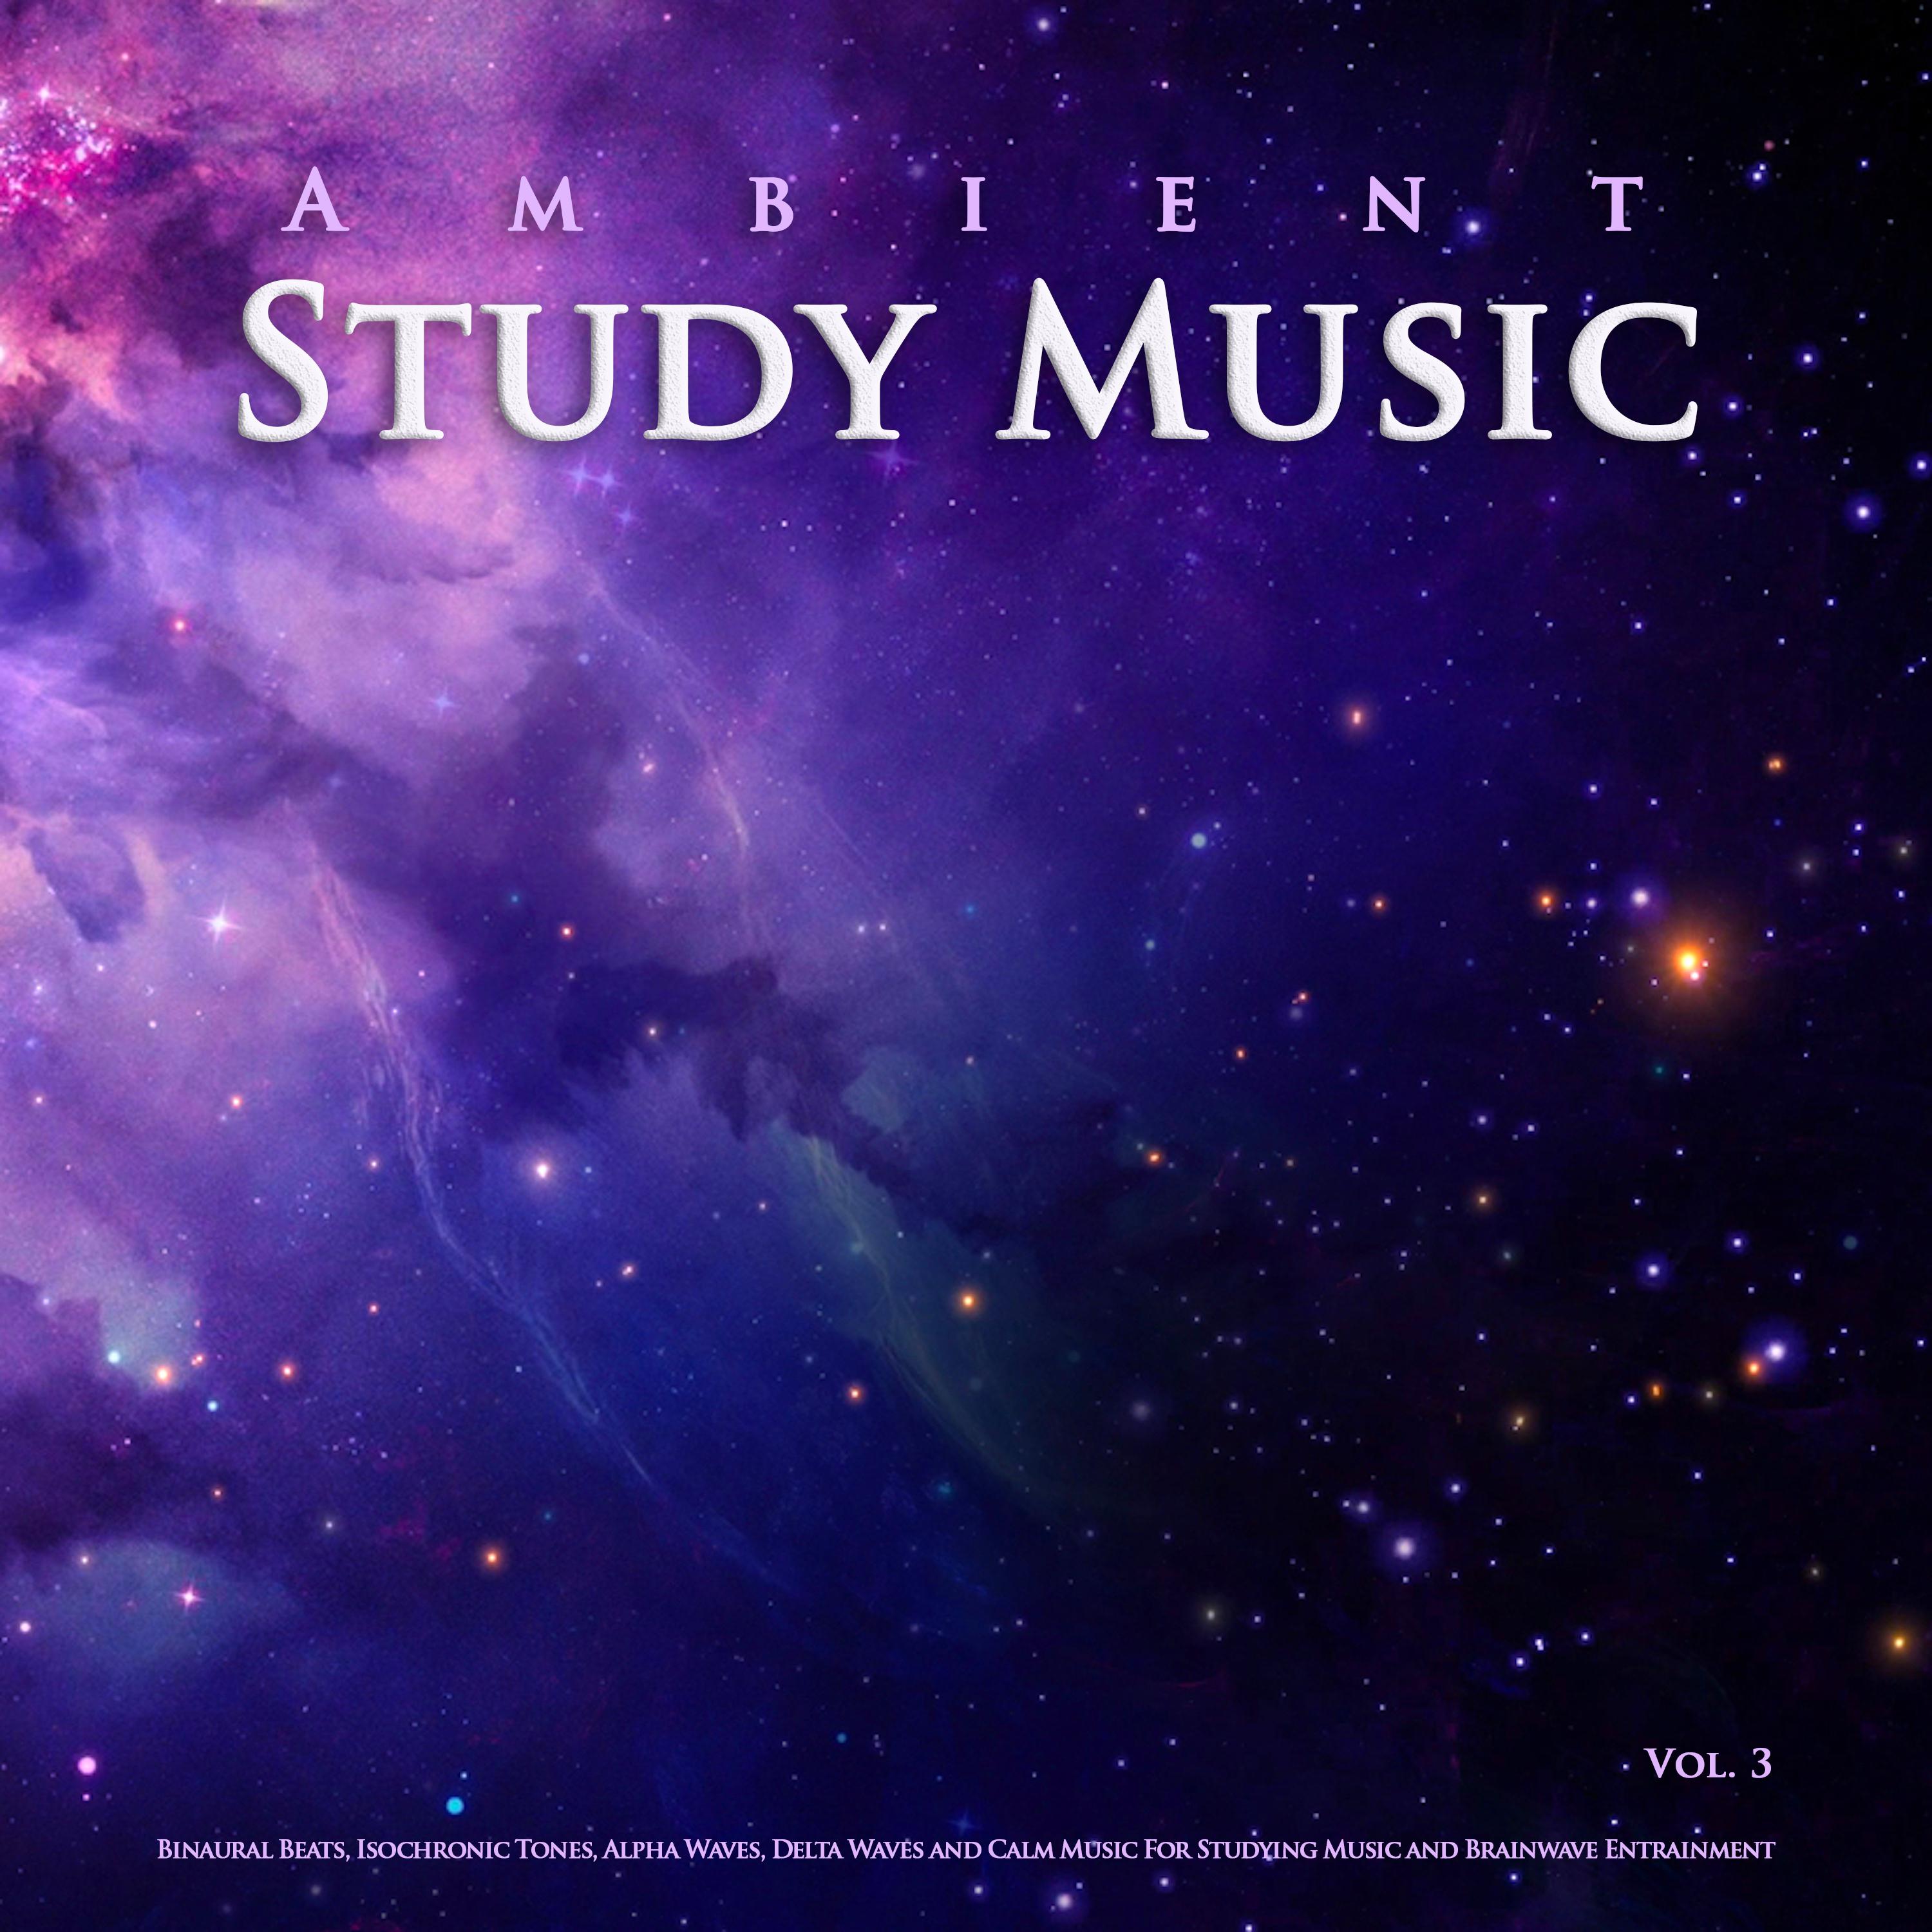 Ambient Study Music: Binaural Beats, Isochronic Tones, Alpha Waves, Delta Waves and Calm Music For Studying Music and Brainwave Entrainment, Vol. 3